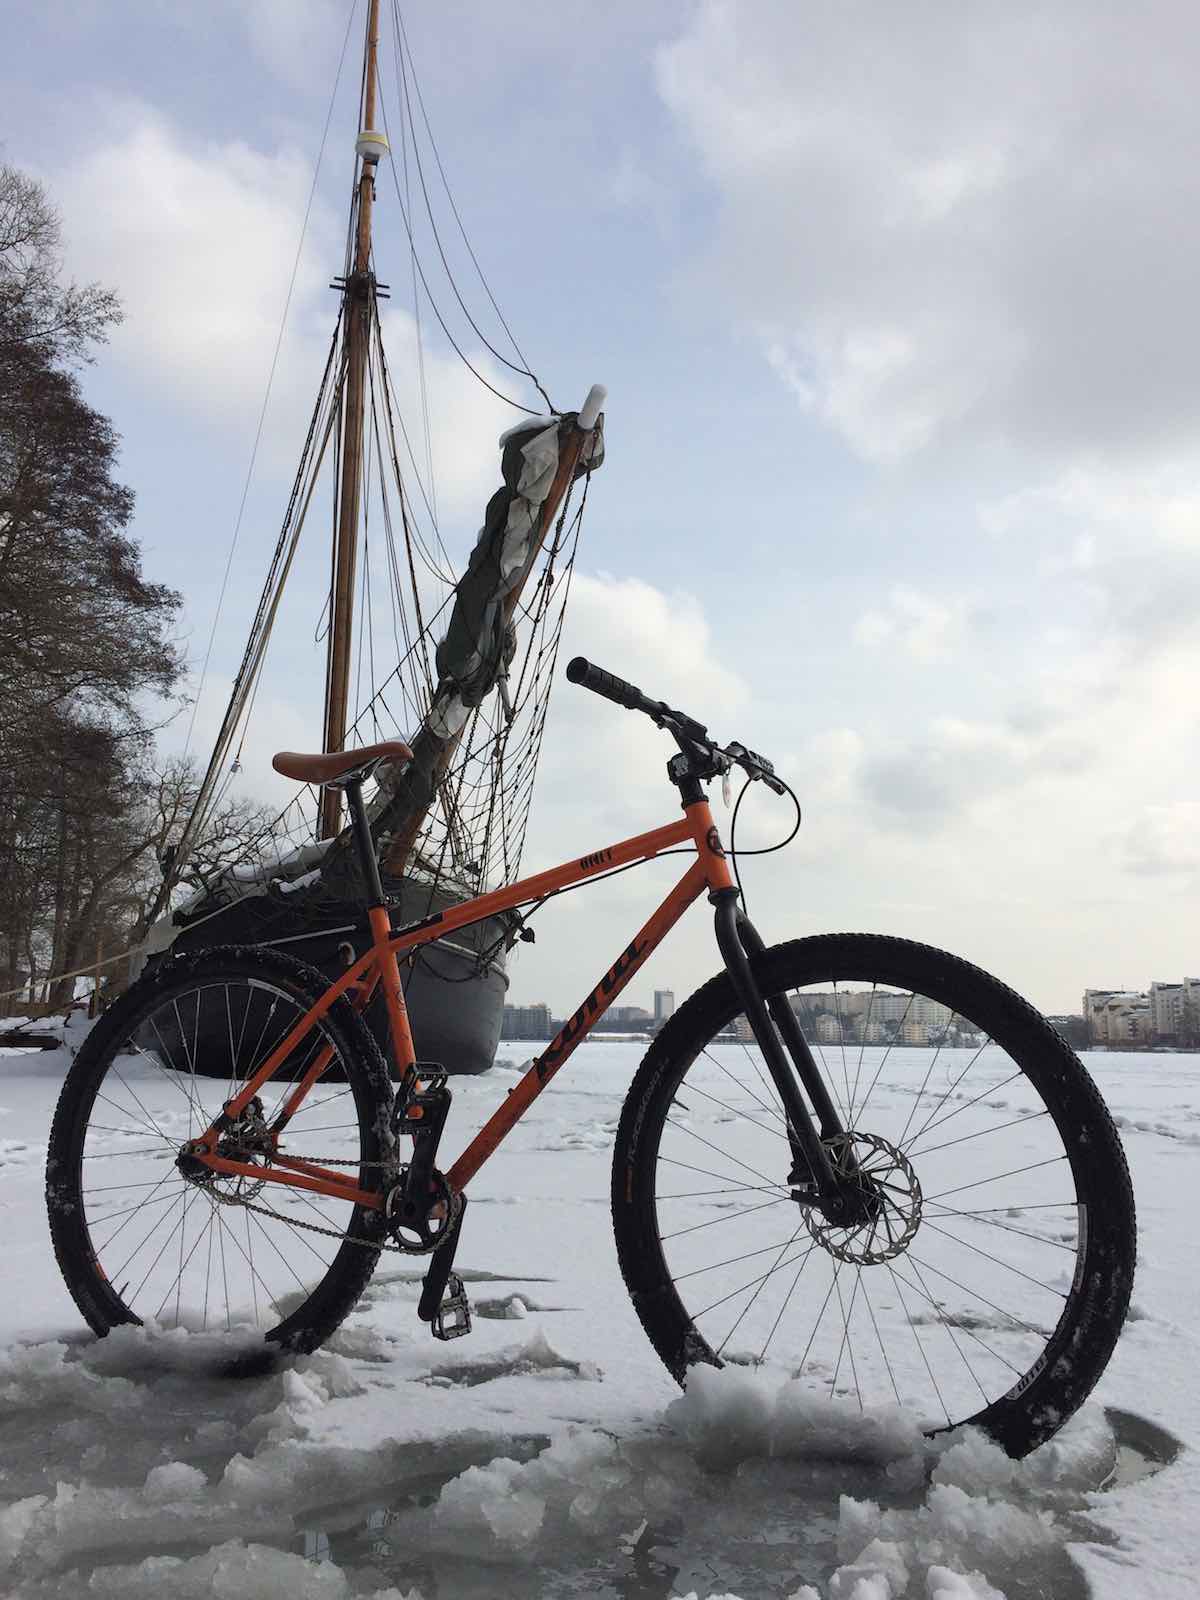 bikerumor pic of the day Stockholm Sweden's tall ships